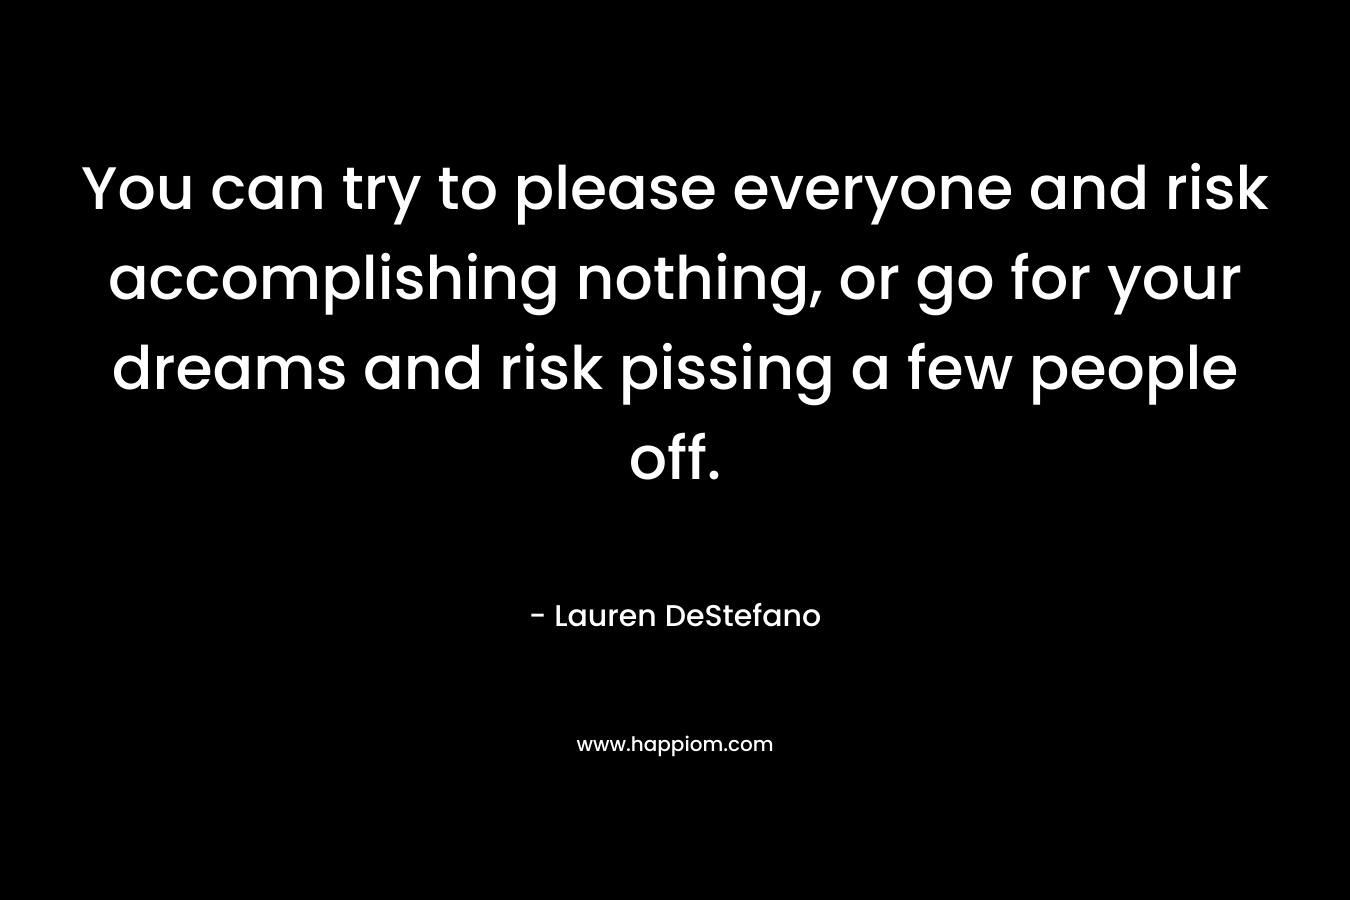 You can try to please everyone and risk accomplishing nothing, or go for your dreams and risk pissing a few people off. – Lauren DeStefano